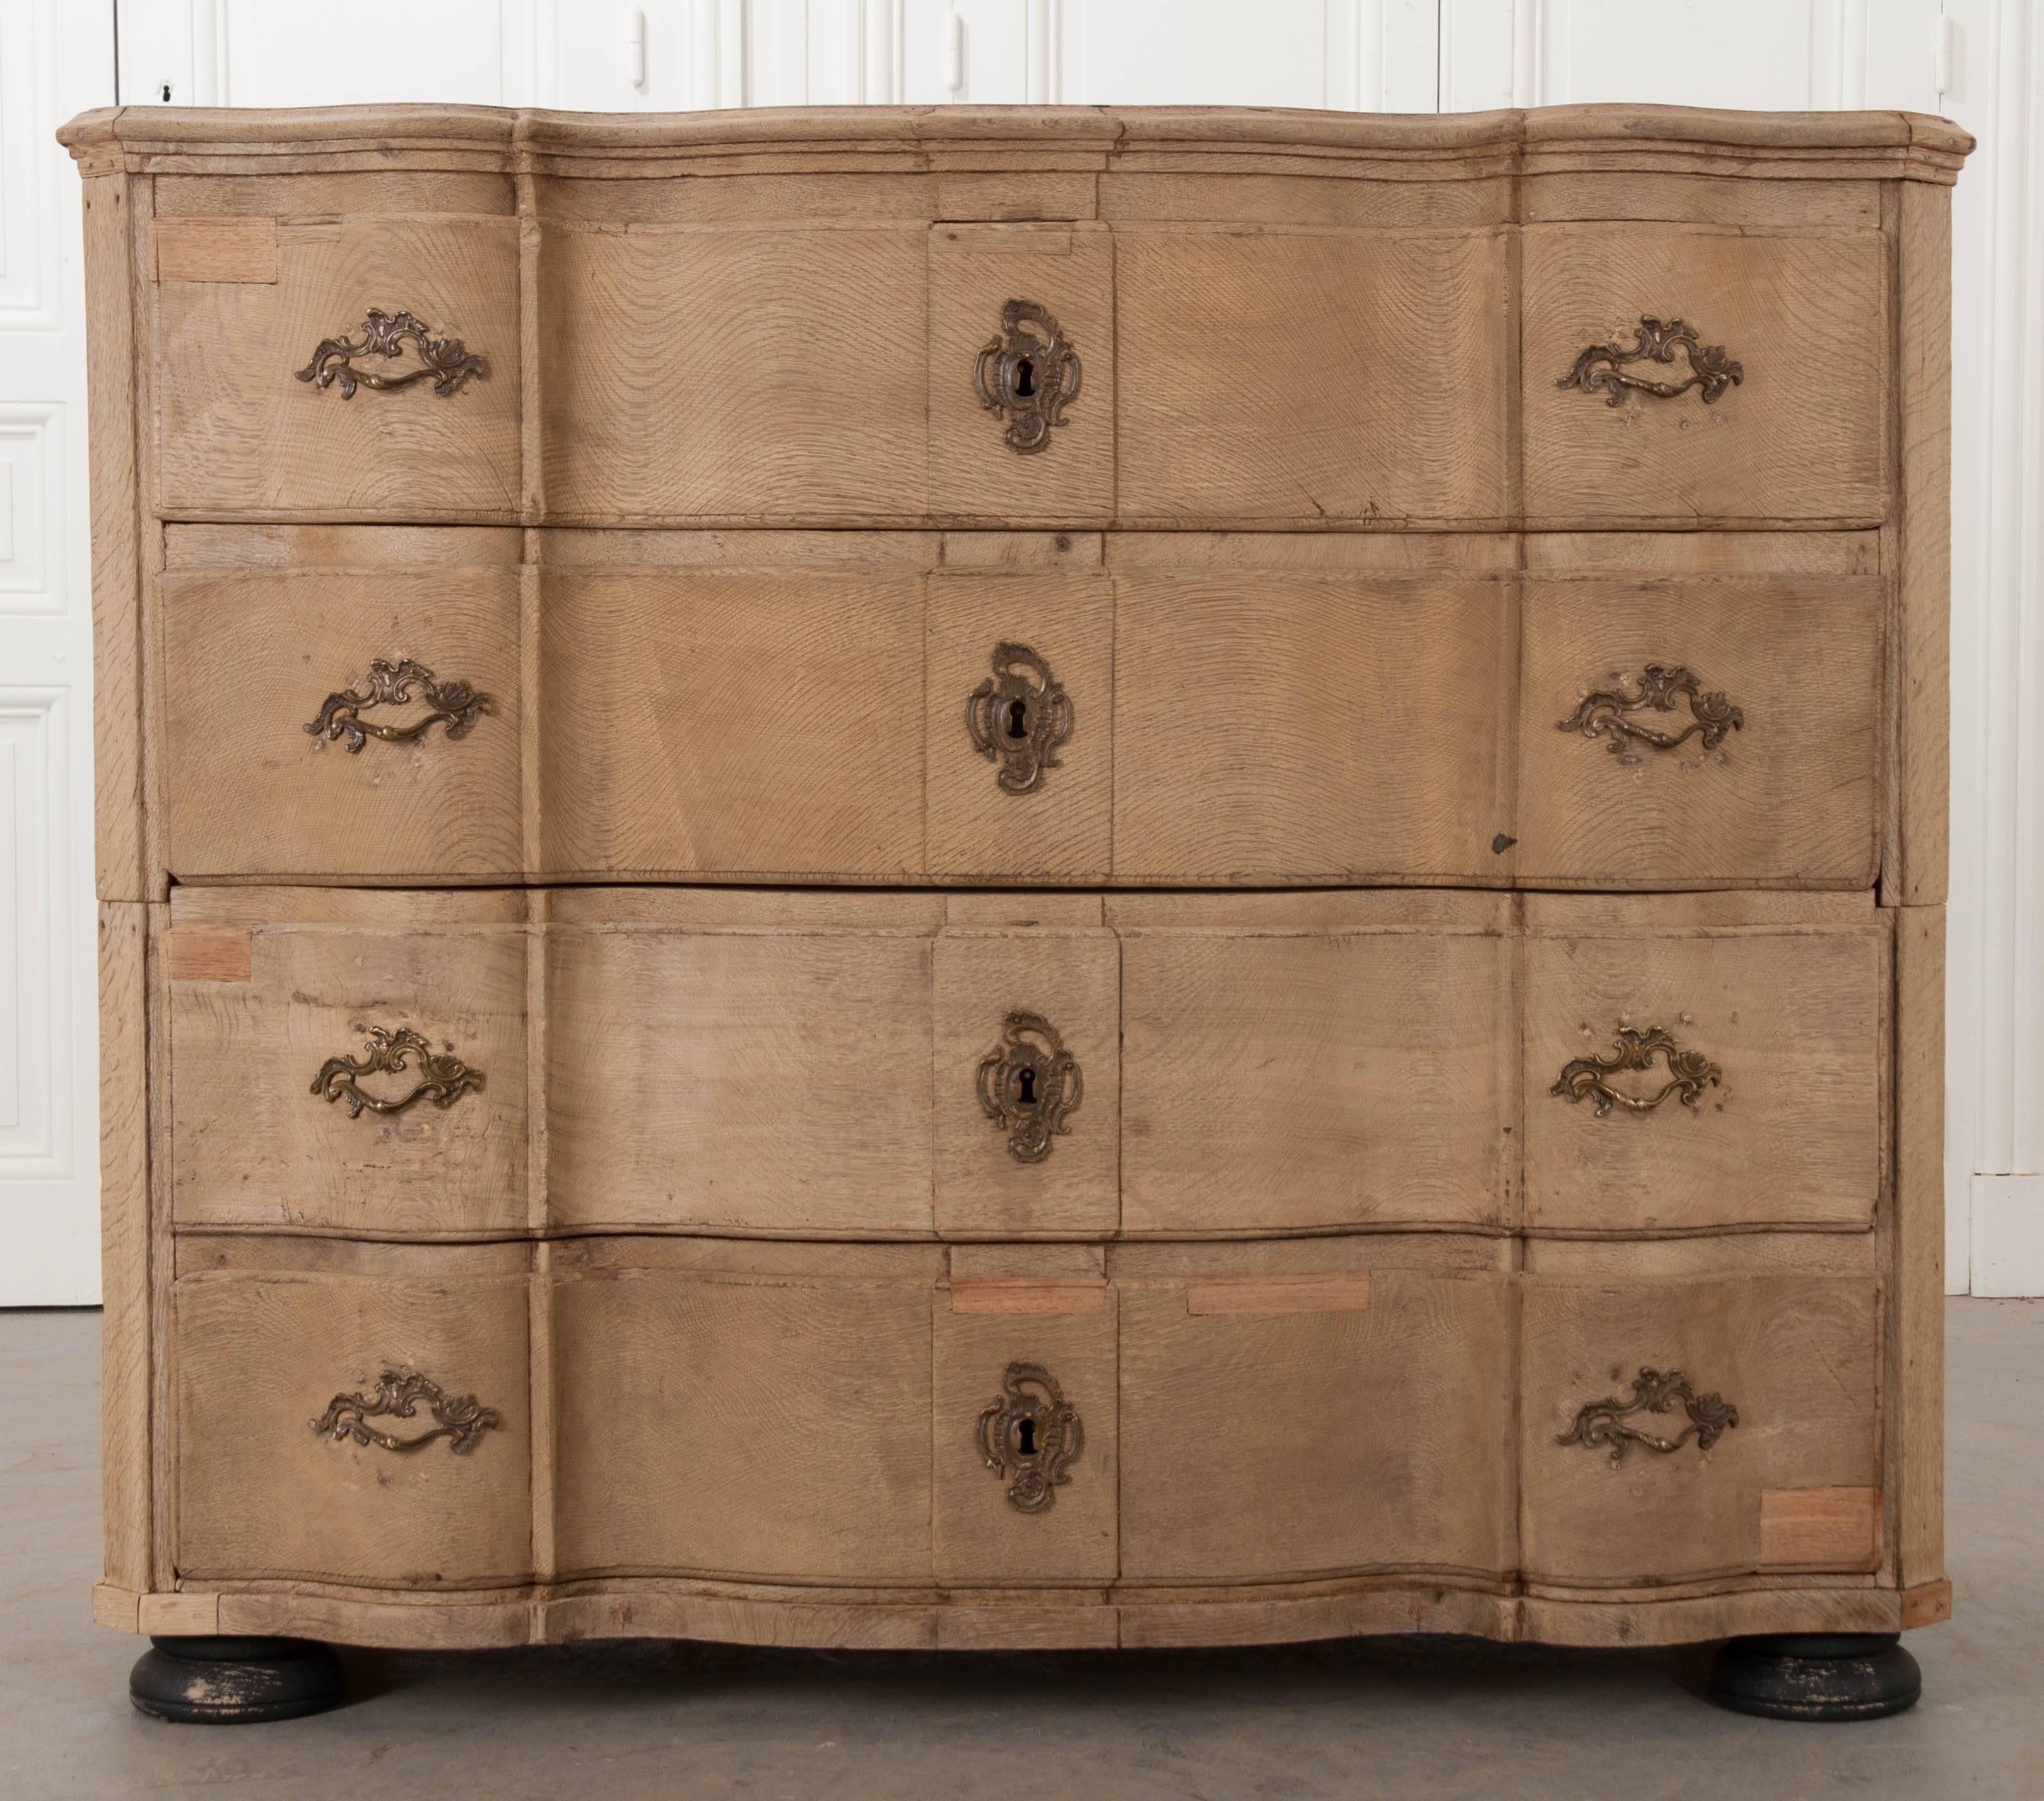 A stunning 19th century Swedish chest-on-chest commode. The oak used to construct the commode has an outstanding bleached finish. The chest separates into two bodies. This makes moving the piece easier, and at the time was a necessity, as 19th